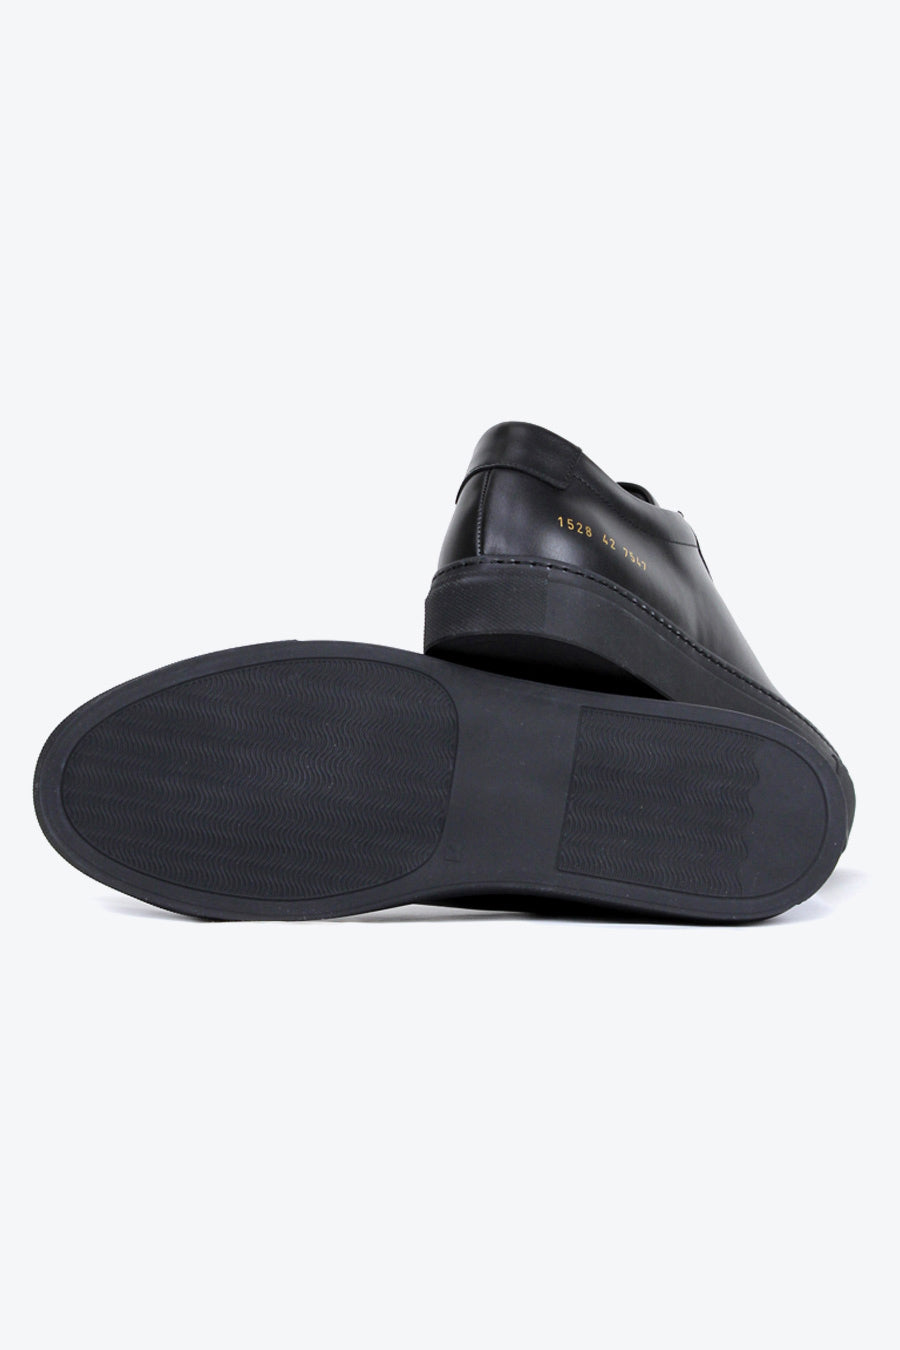 COMMON PROJECTS | ORIGINAL ACHILLES LOW 1528 / BLACK 7547 アキレス ...